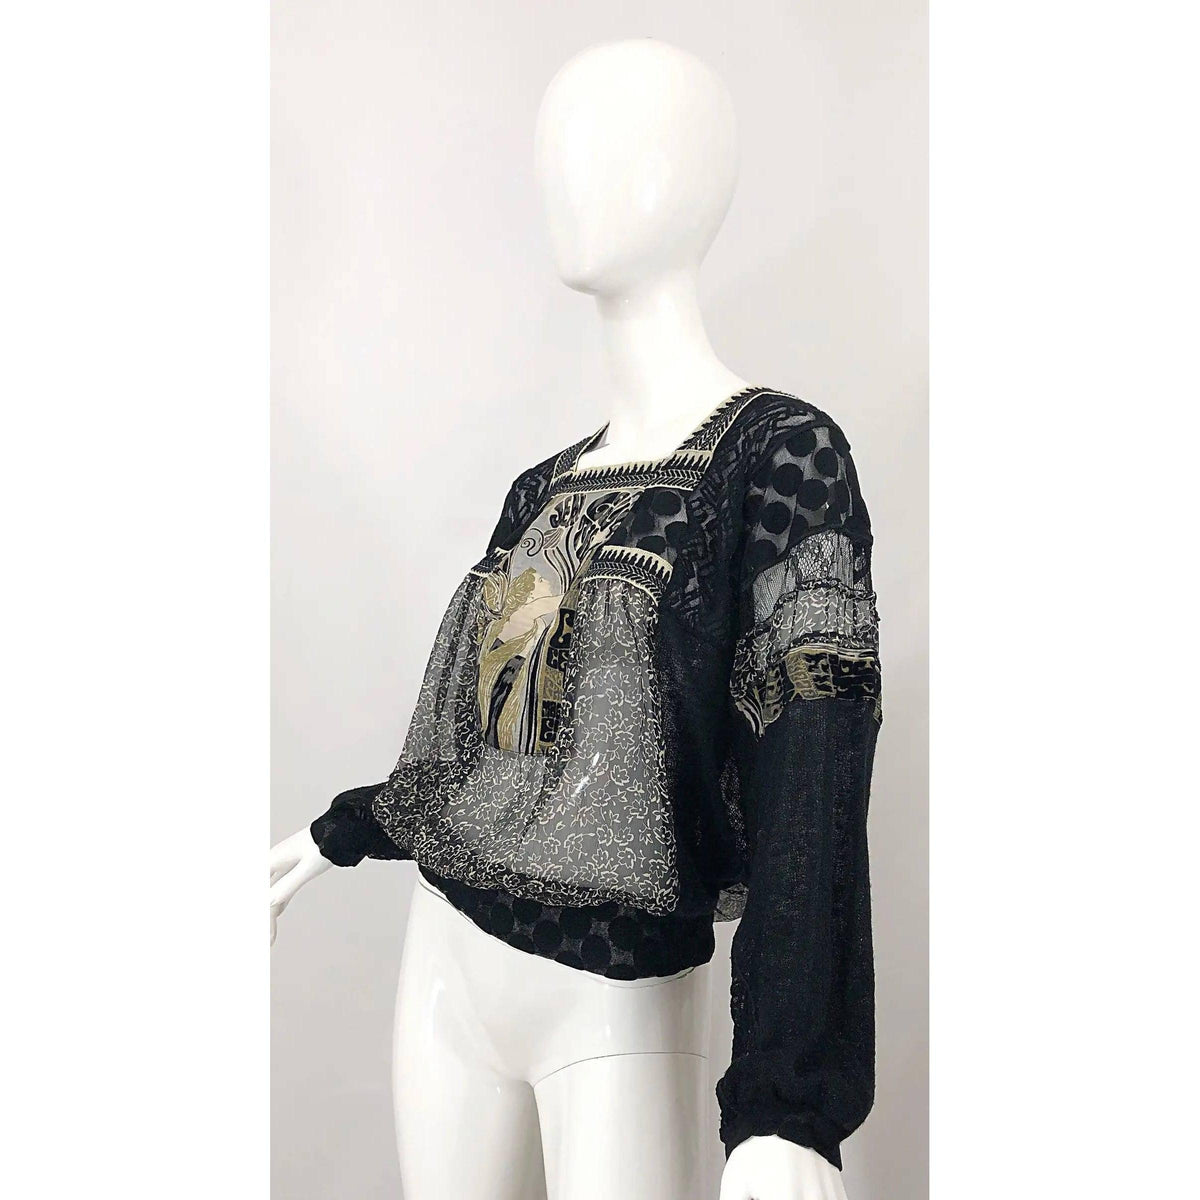 Pre-Owned JEAN PAUL GAULTIER Hand Painted Rapunzel Print Black Sheer Blouse - theREMODA